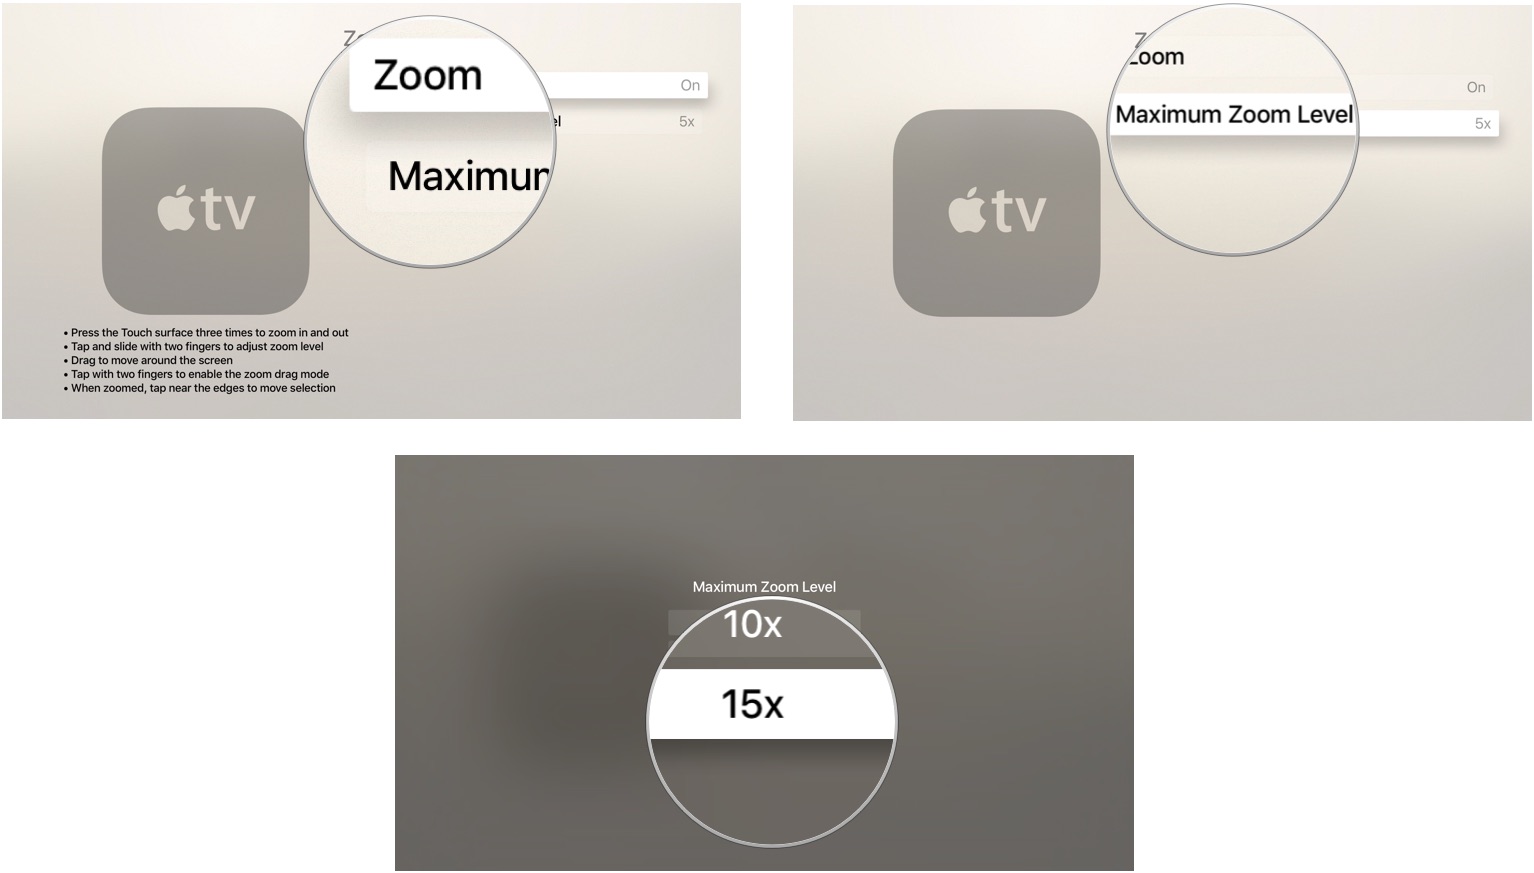 Enabling Zoom and adjusting max level on Apple TV